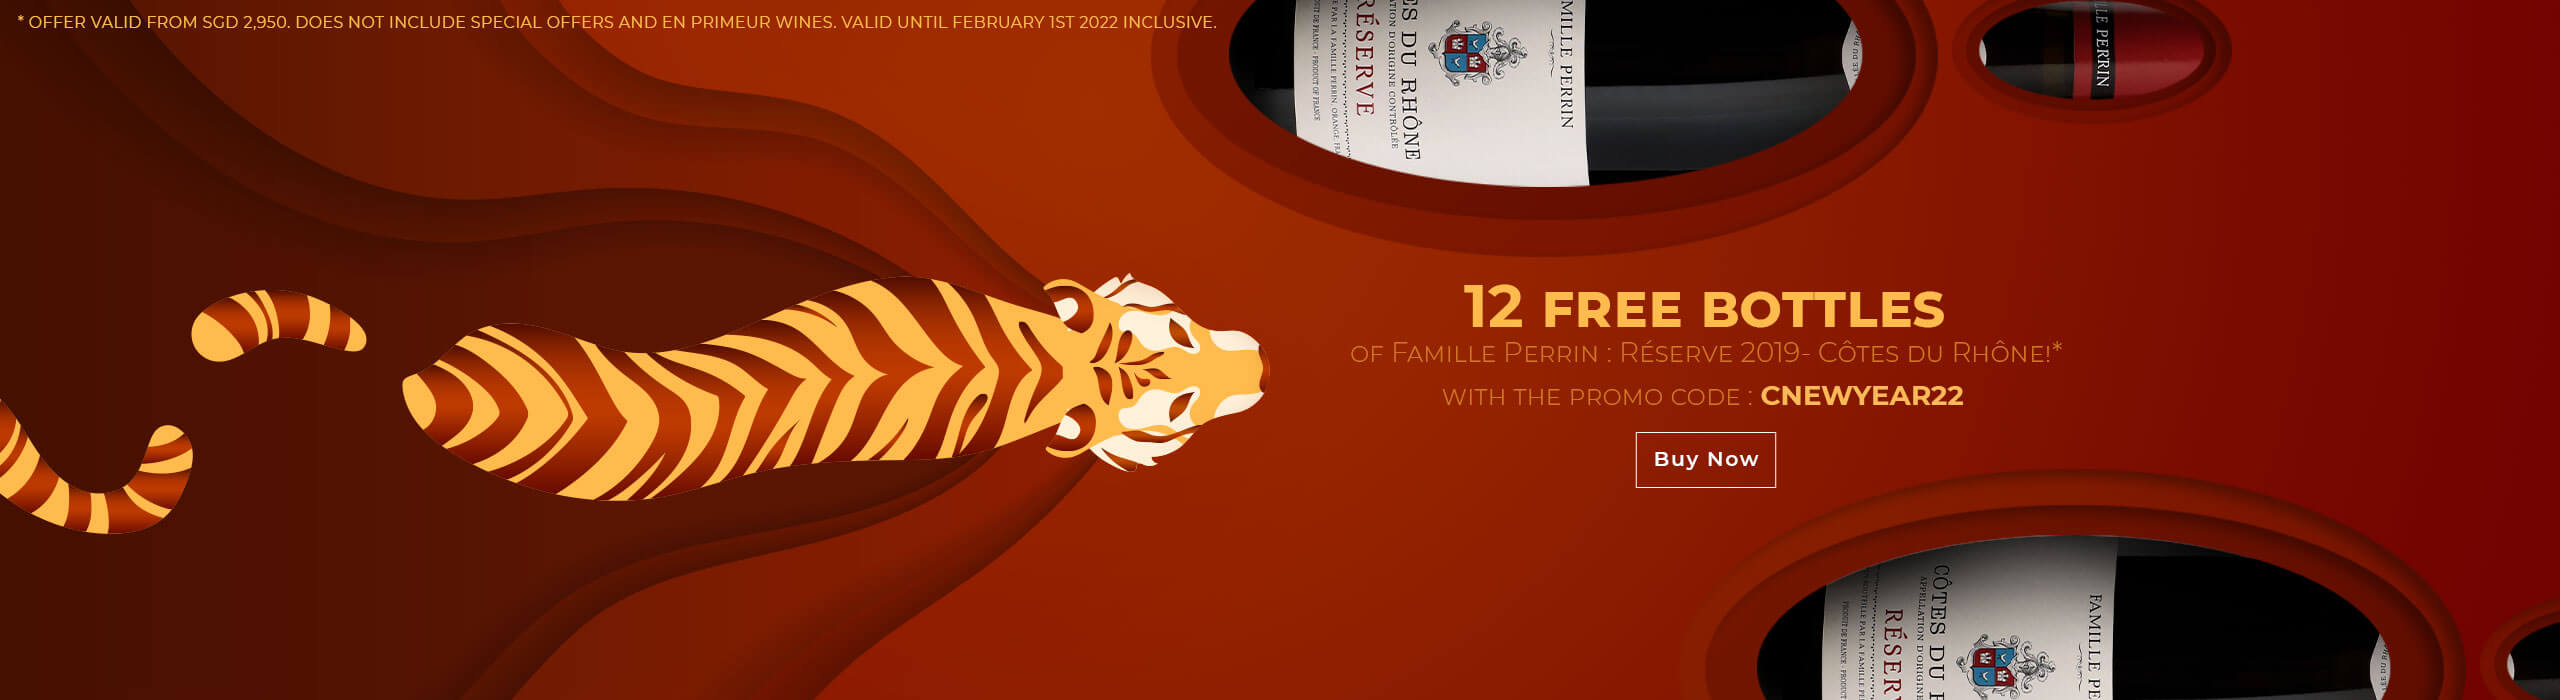 Celebrate the Year of the Tiger with Millésima